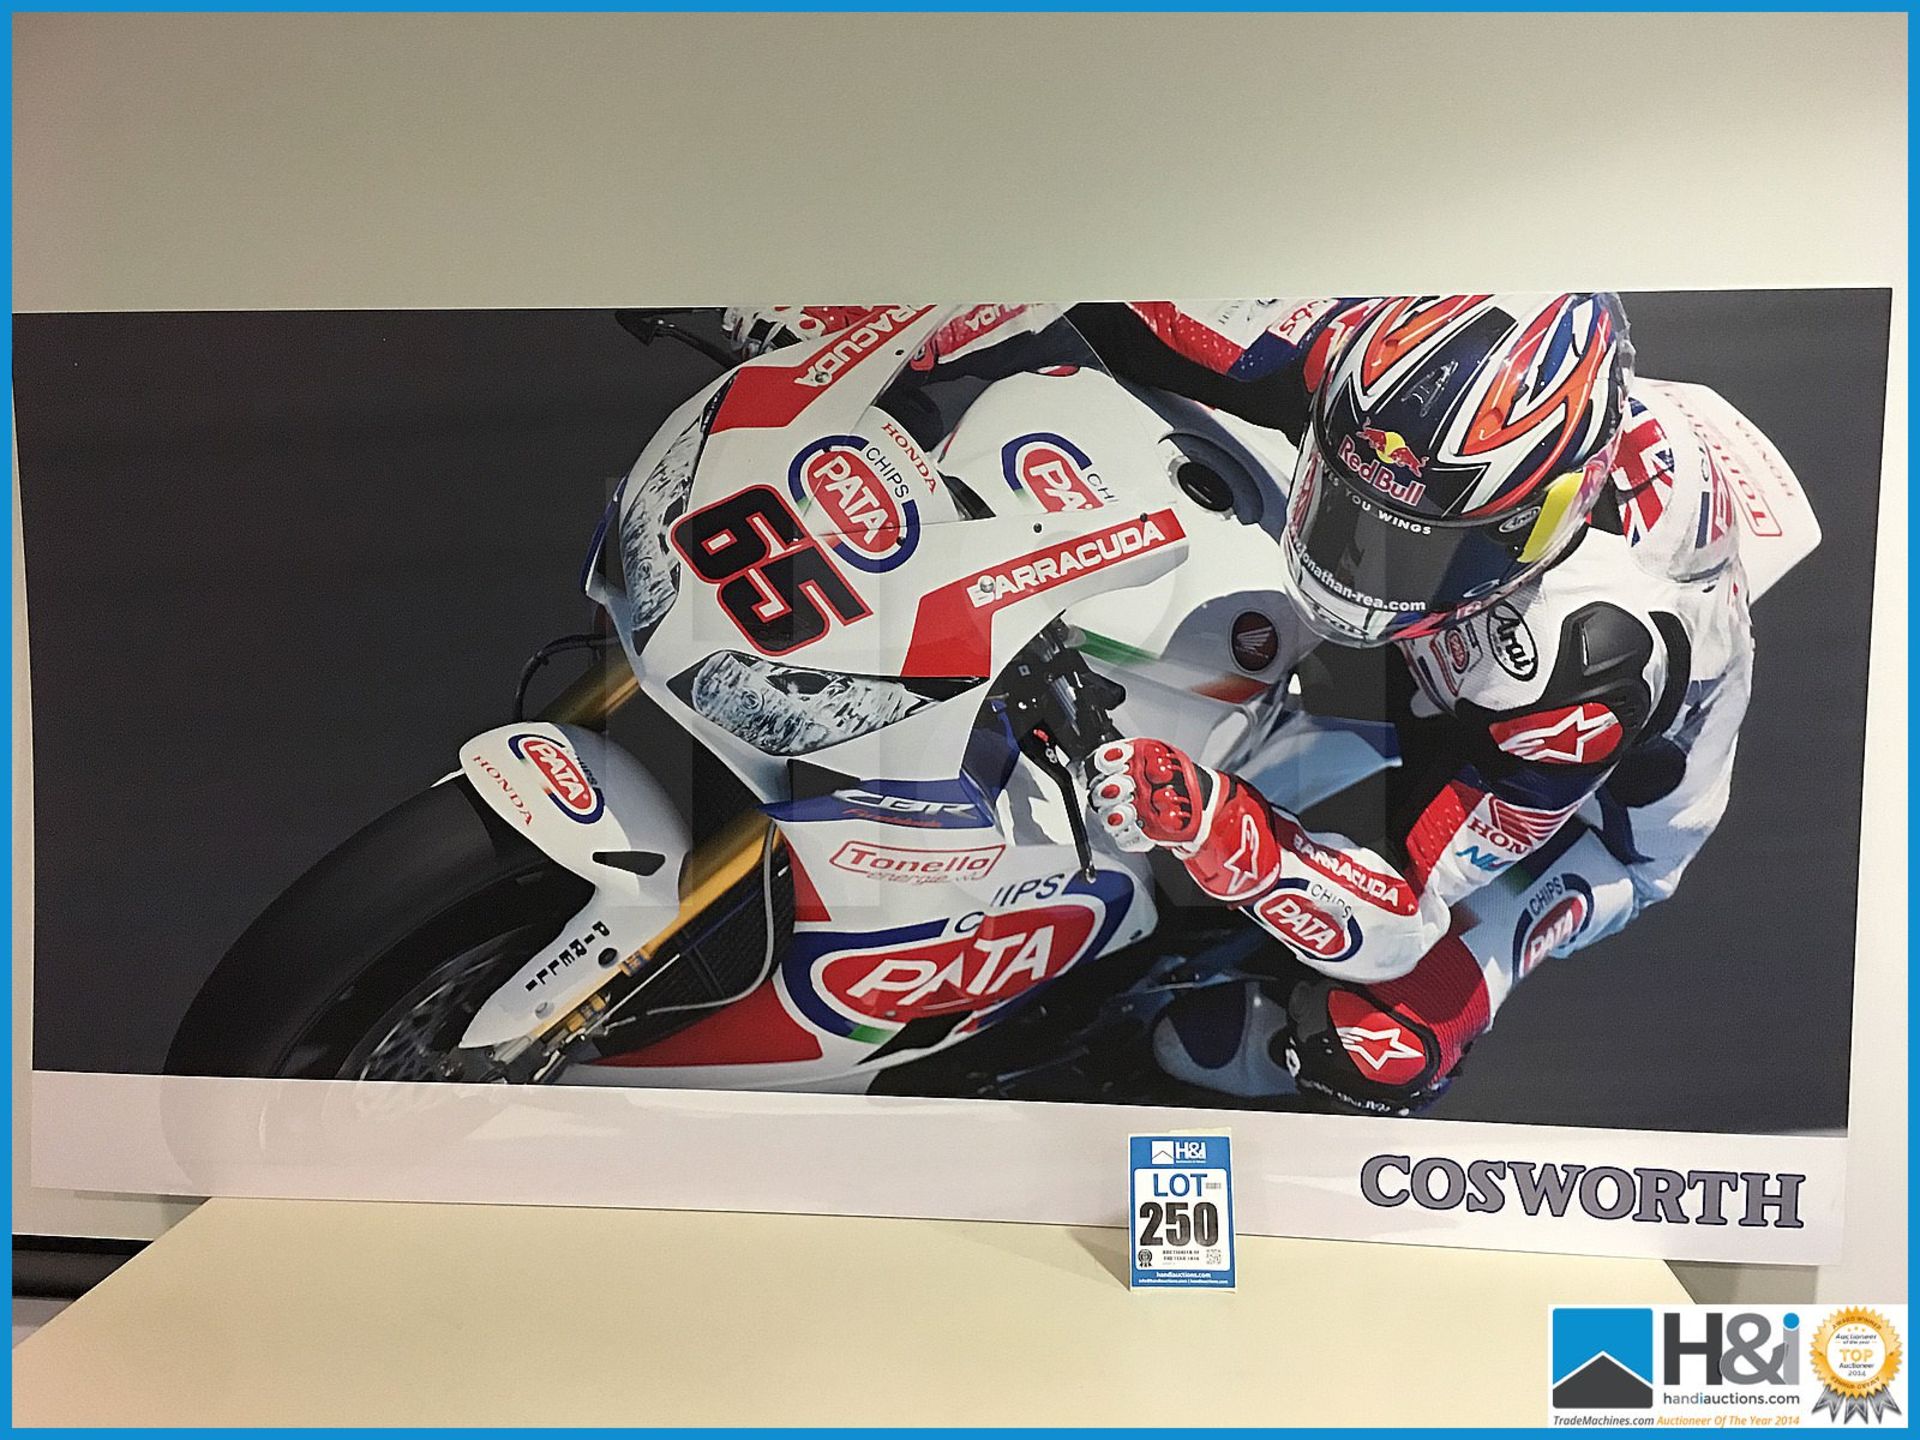 Cosworth promo artwork piece featuring motorcycle racer. Approx 6ft X 3ft X 3mm thick. MC: N/A CILN: